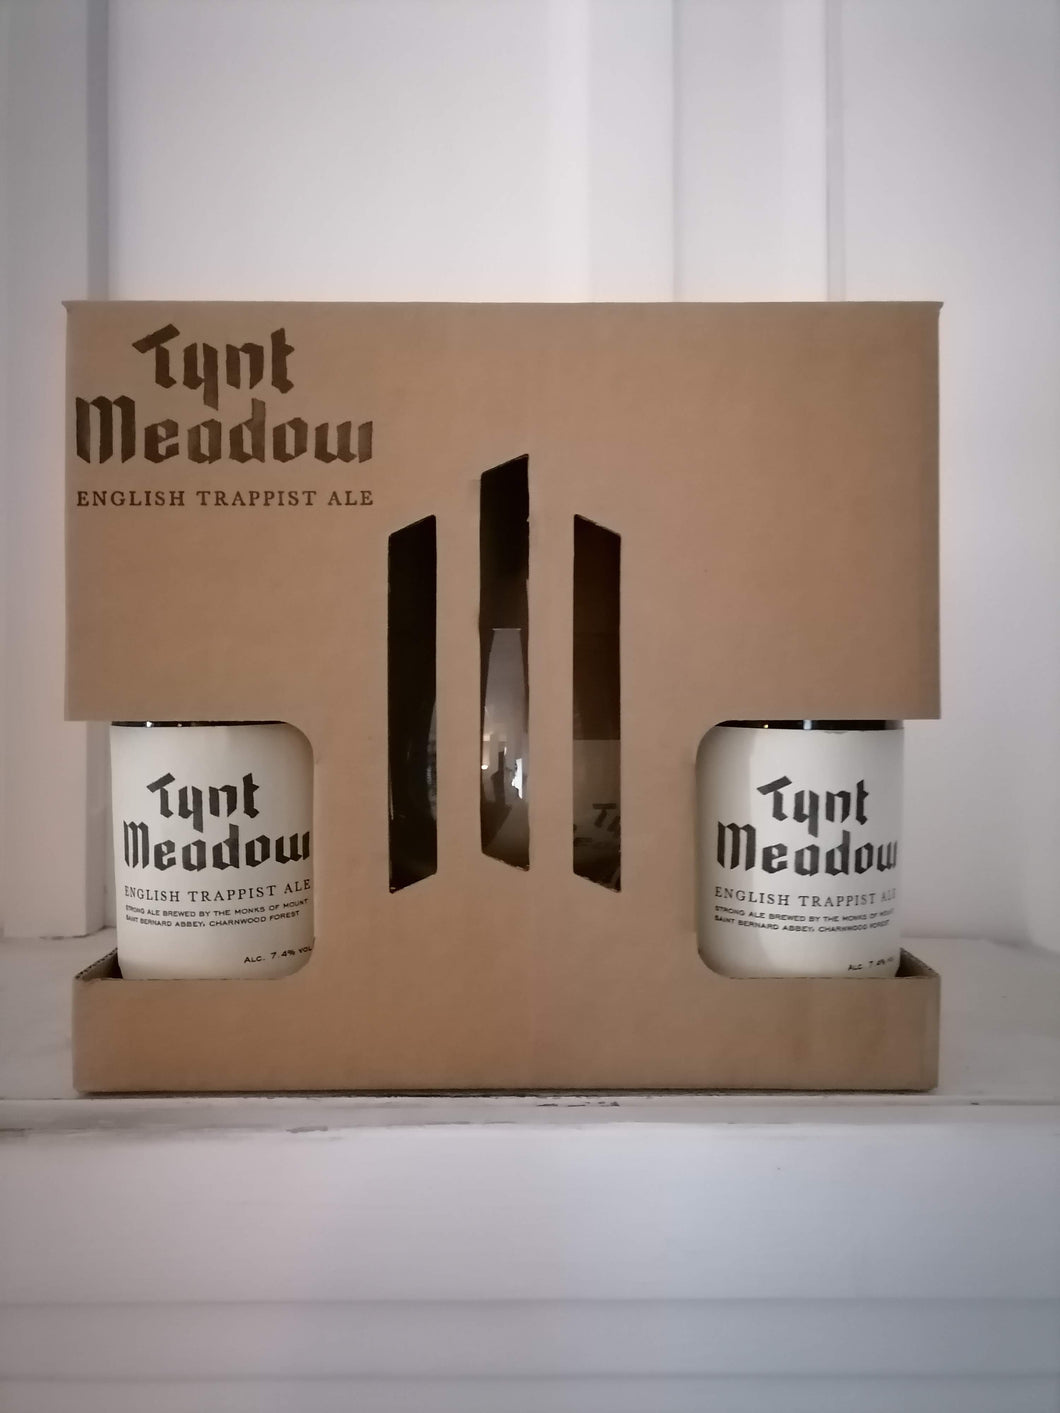 Tynt Meadow Gift Pack 7.4% (2 x 330ml bottles and branded glass)